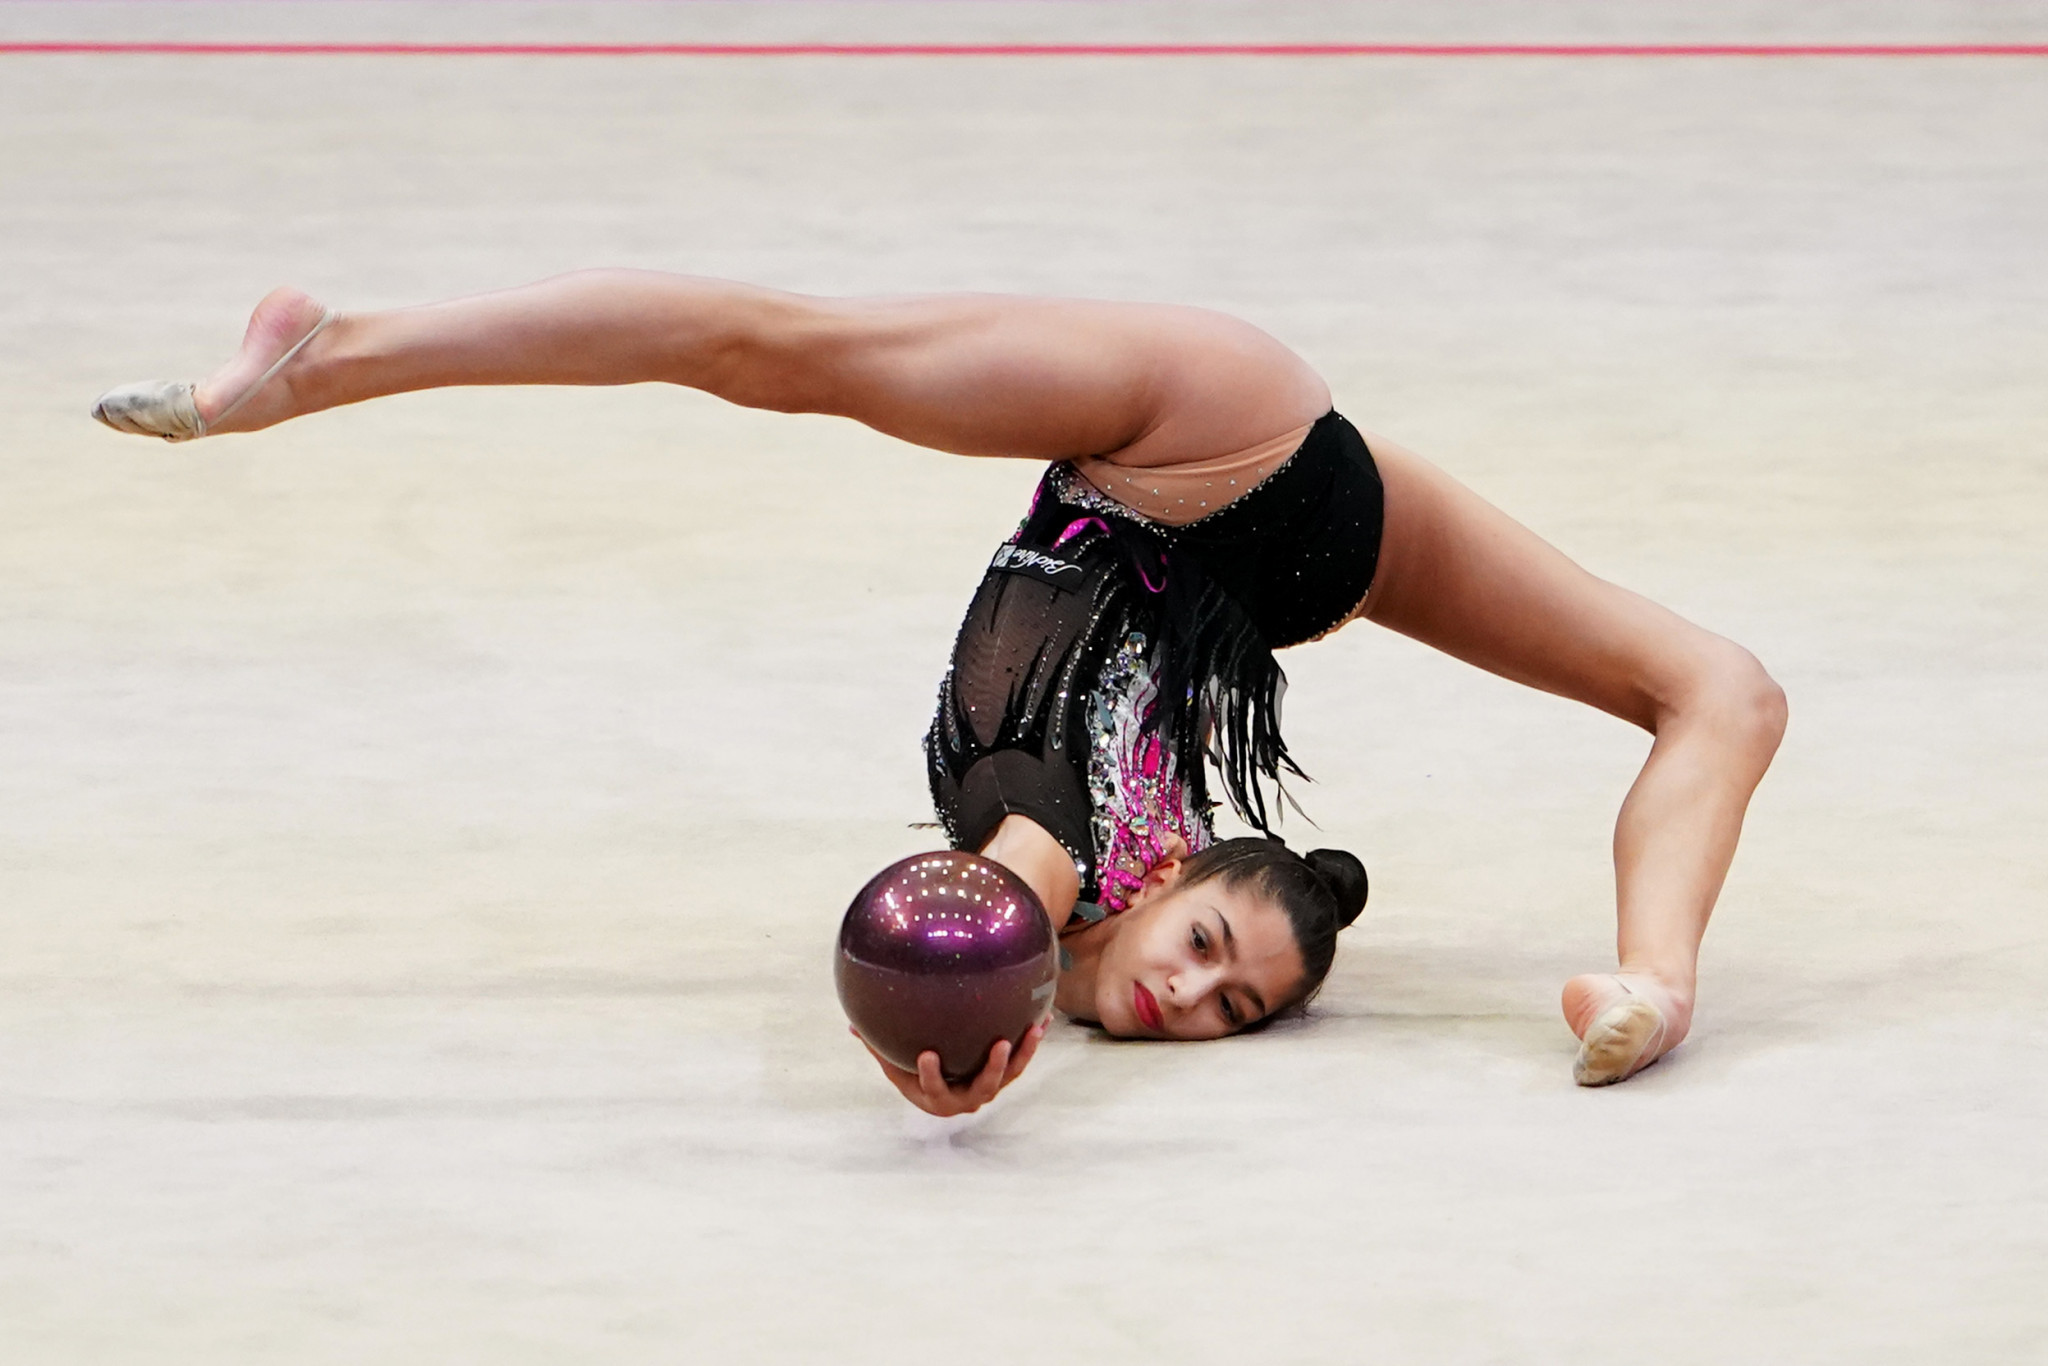 Sofia Raffaeli earned apparatus titles in the ball and clubs events as the Rhythmic Gymnastics World Cup in Athens concluded today ©Getty Images